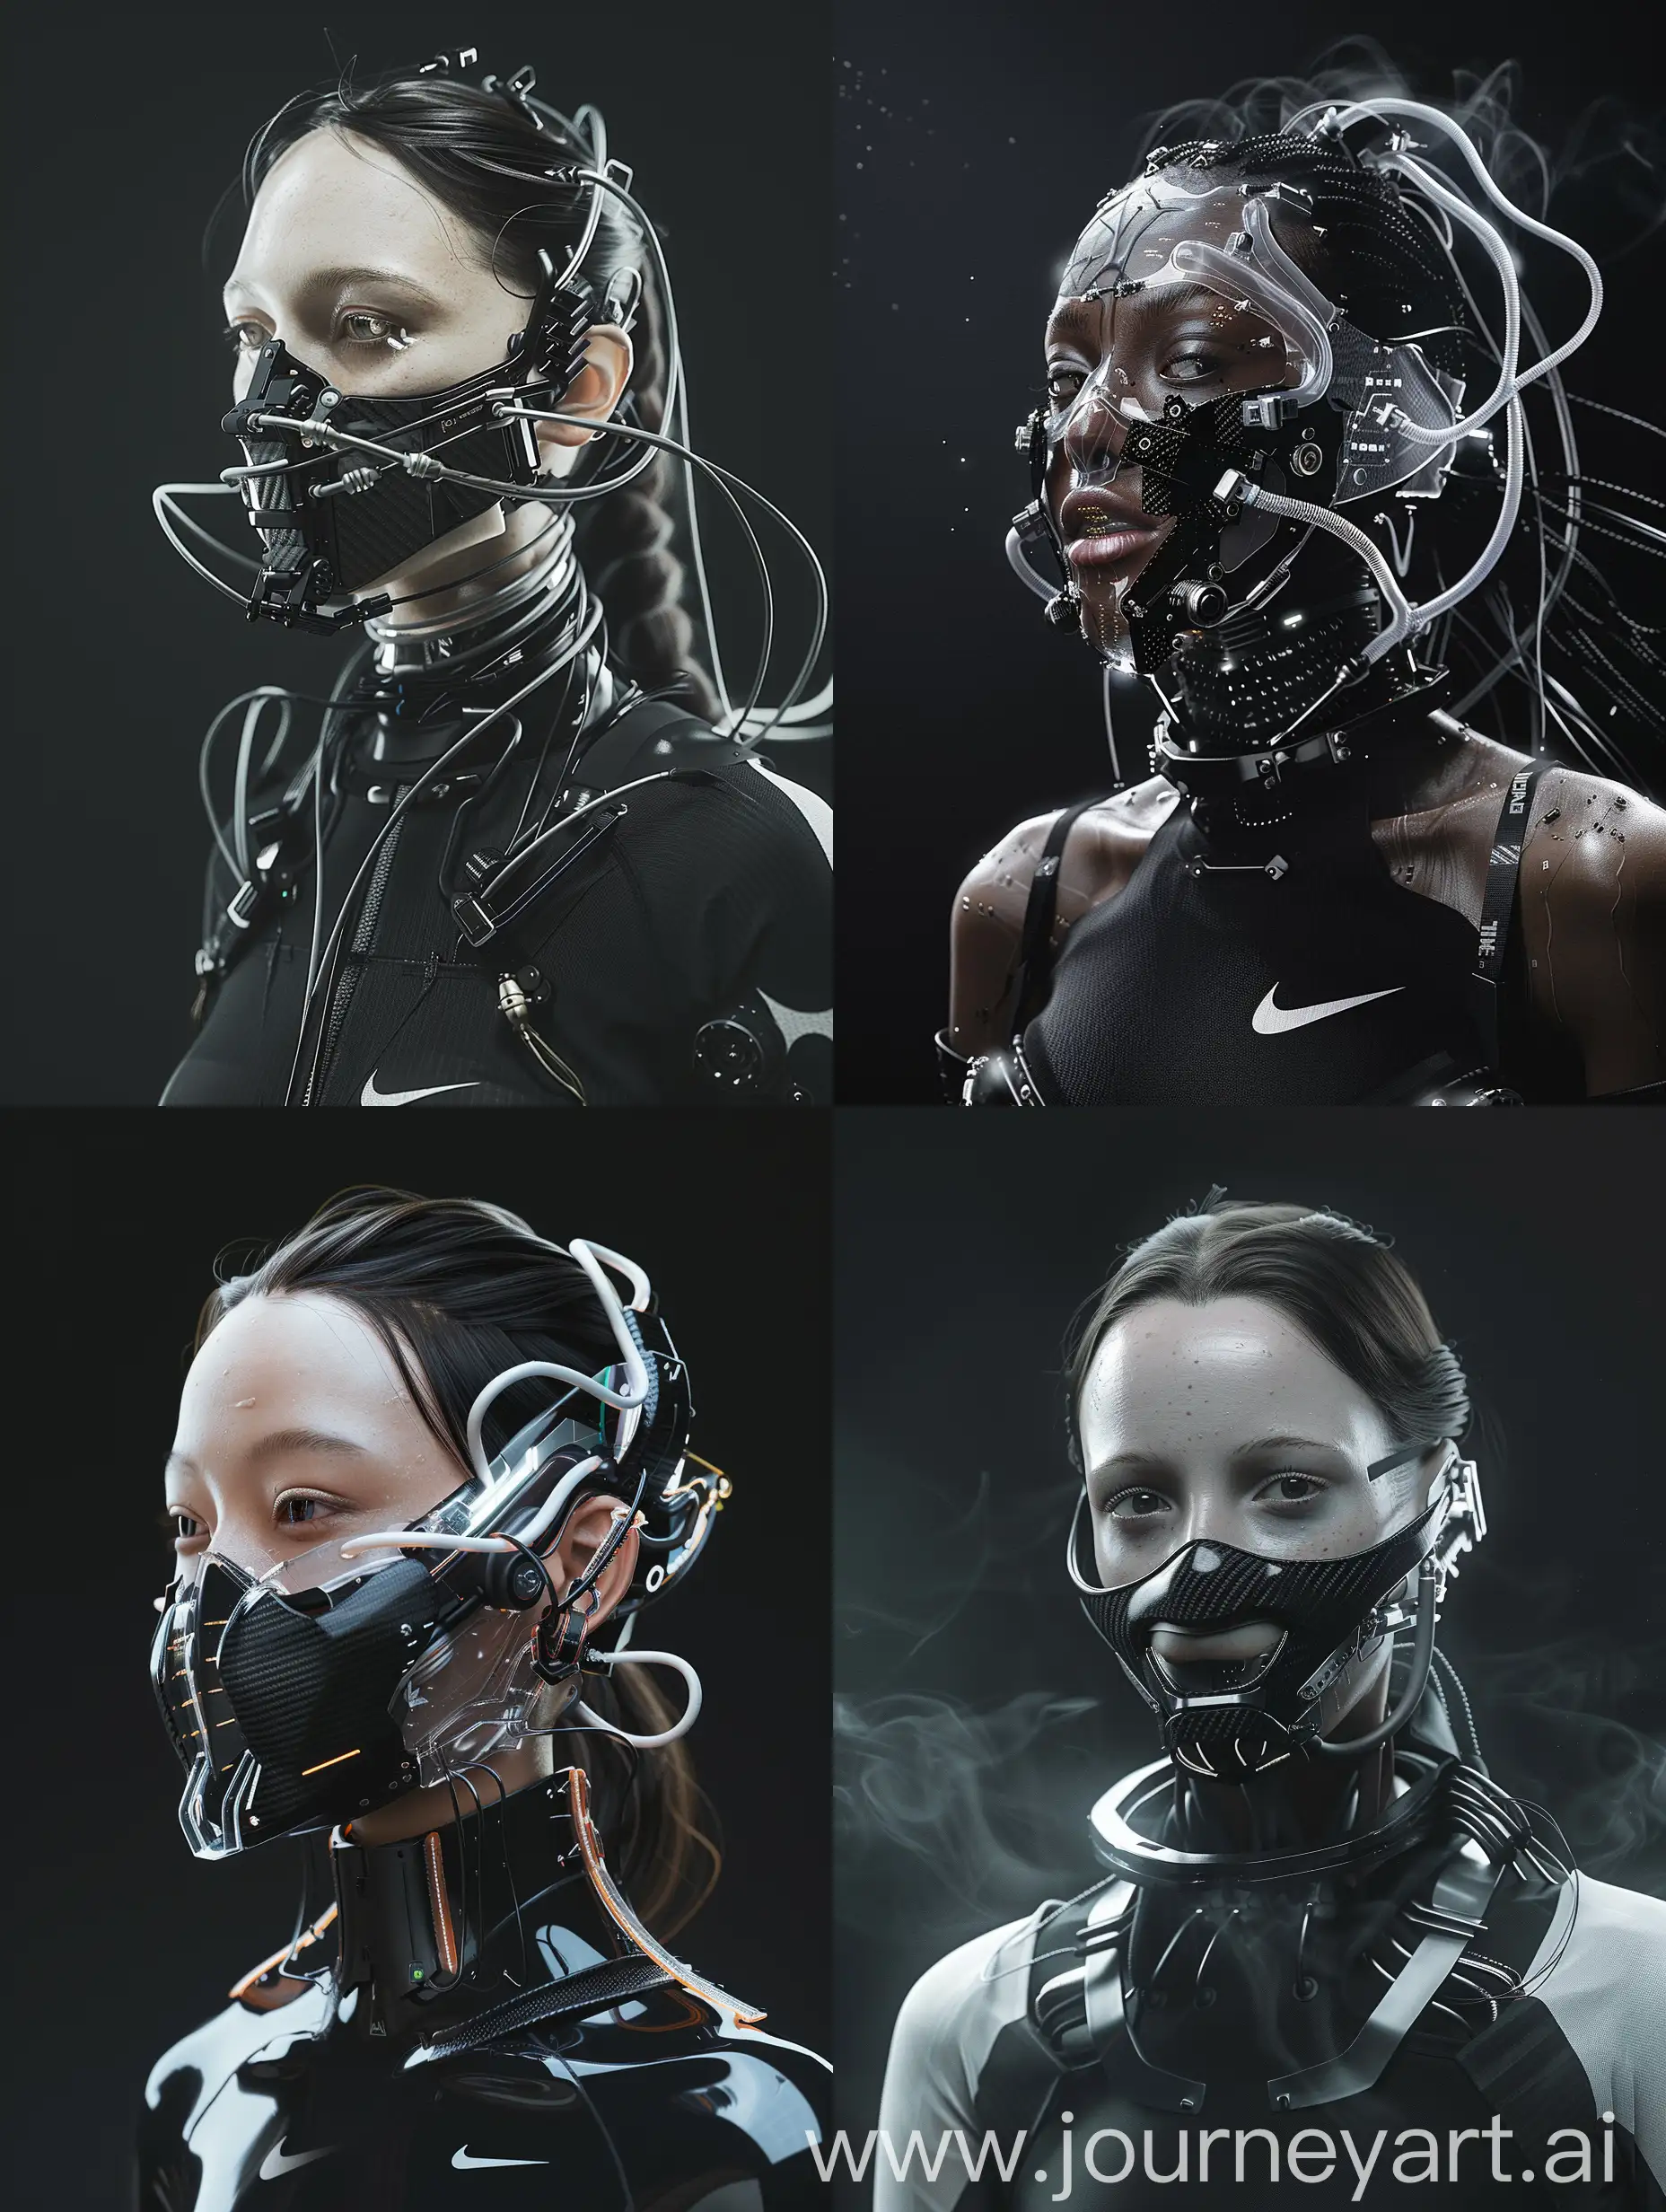 Futuristic-Cyberpunk-Character-with-Intricate-TechnoMask-and-NikeInspired-Accessories